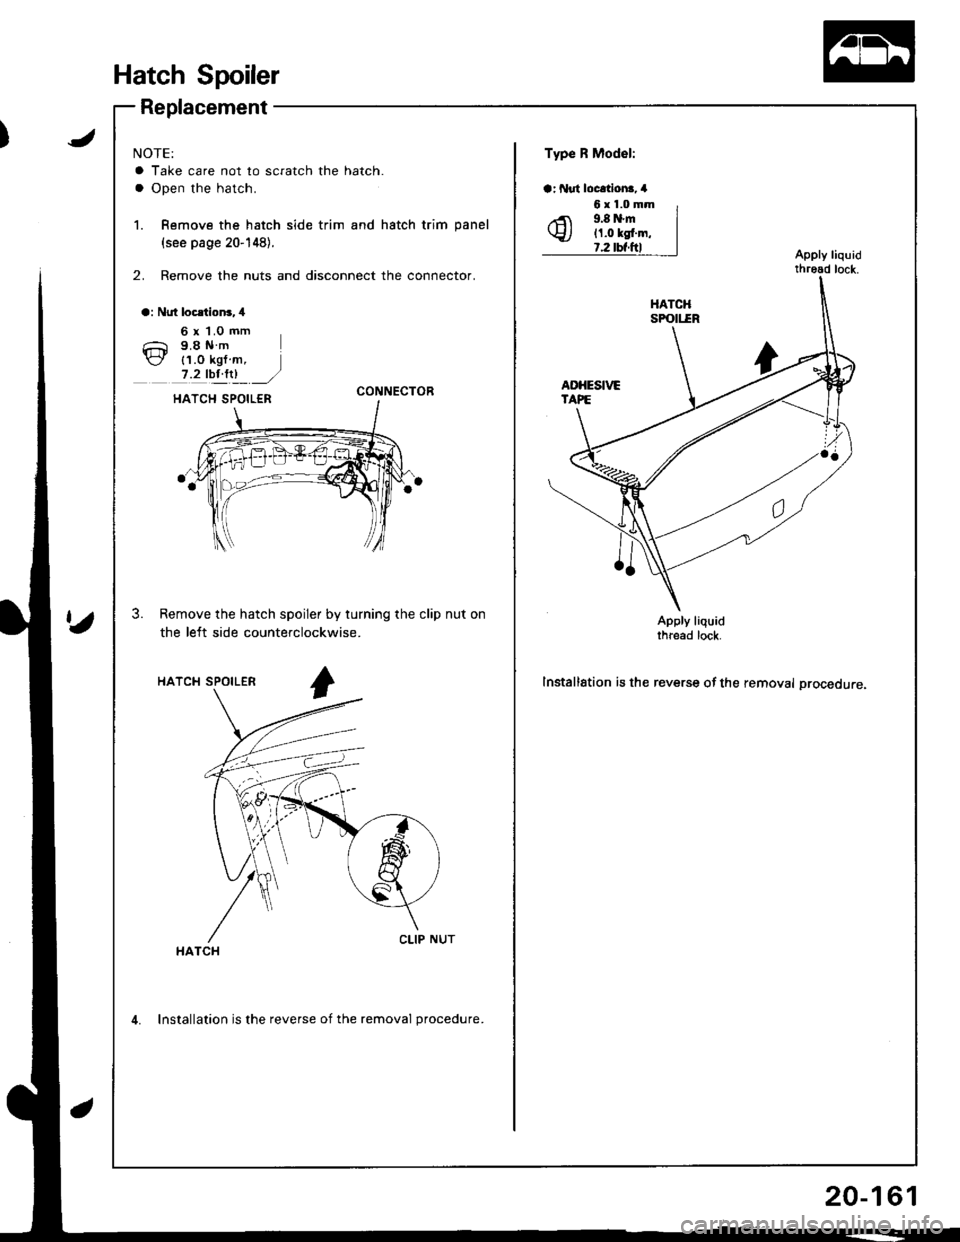 HONDA INTEGRA 1998 4.G Workshop Manual J
Hatch Spoiler
Replacement
NOTE:
a Take care not to scratch the hatch.
a Open the hatch.
1. Remove the hatch side trim and hatch trim panel
{see page 20-148}.
2. Remove the nuts and disconnect the co